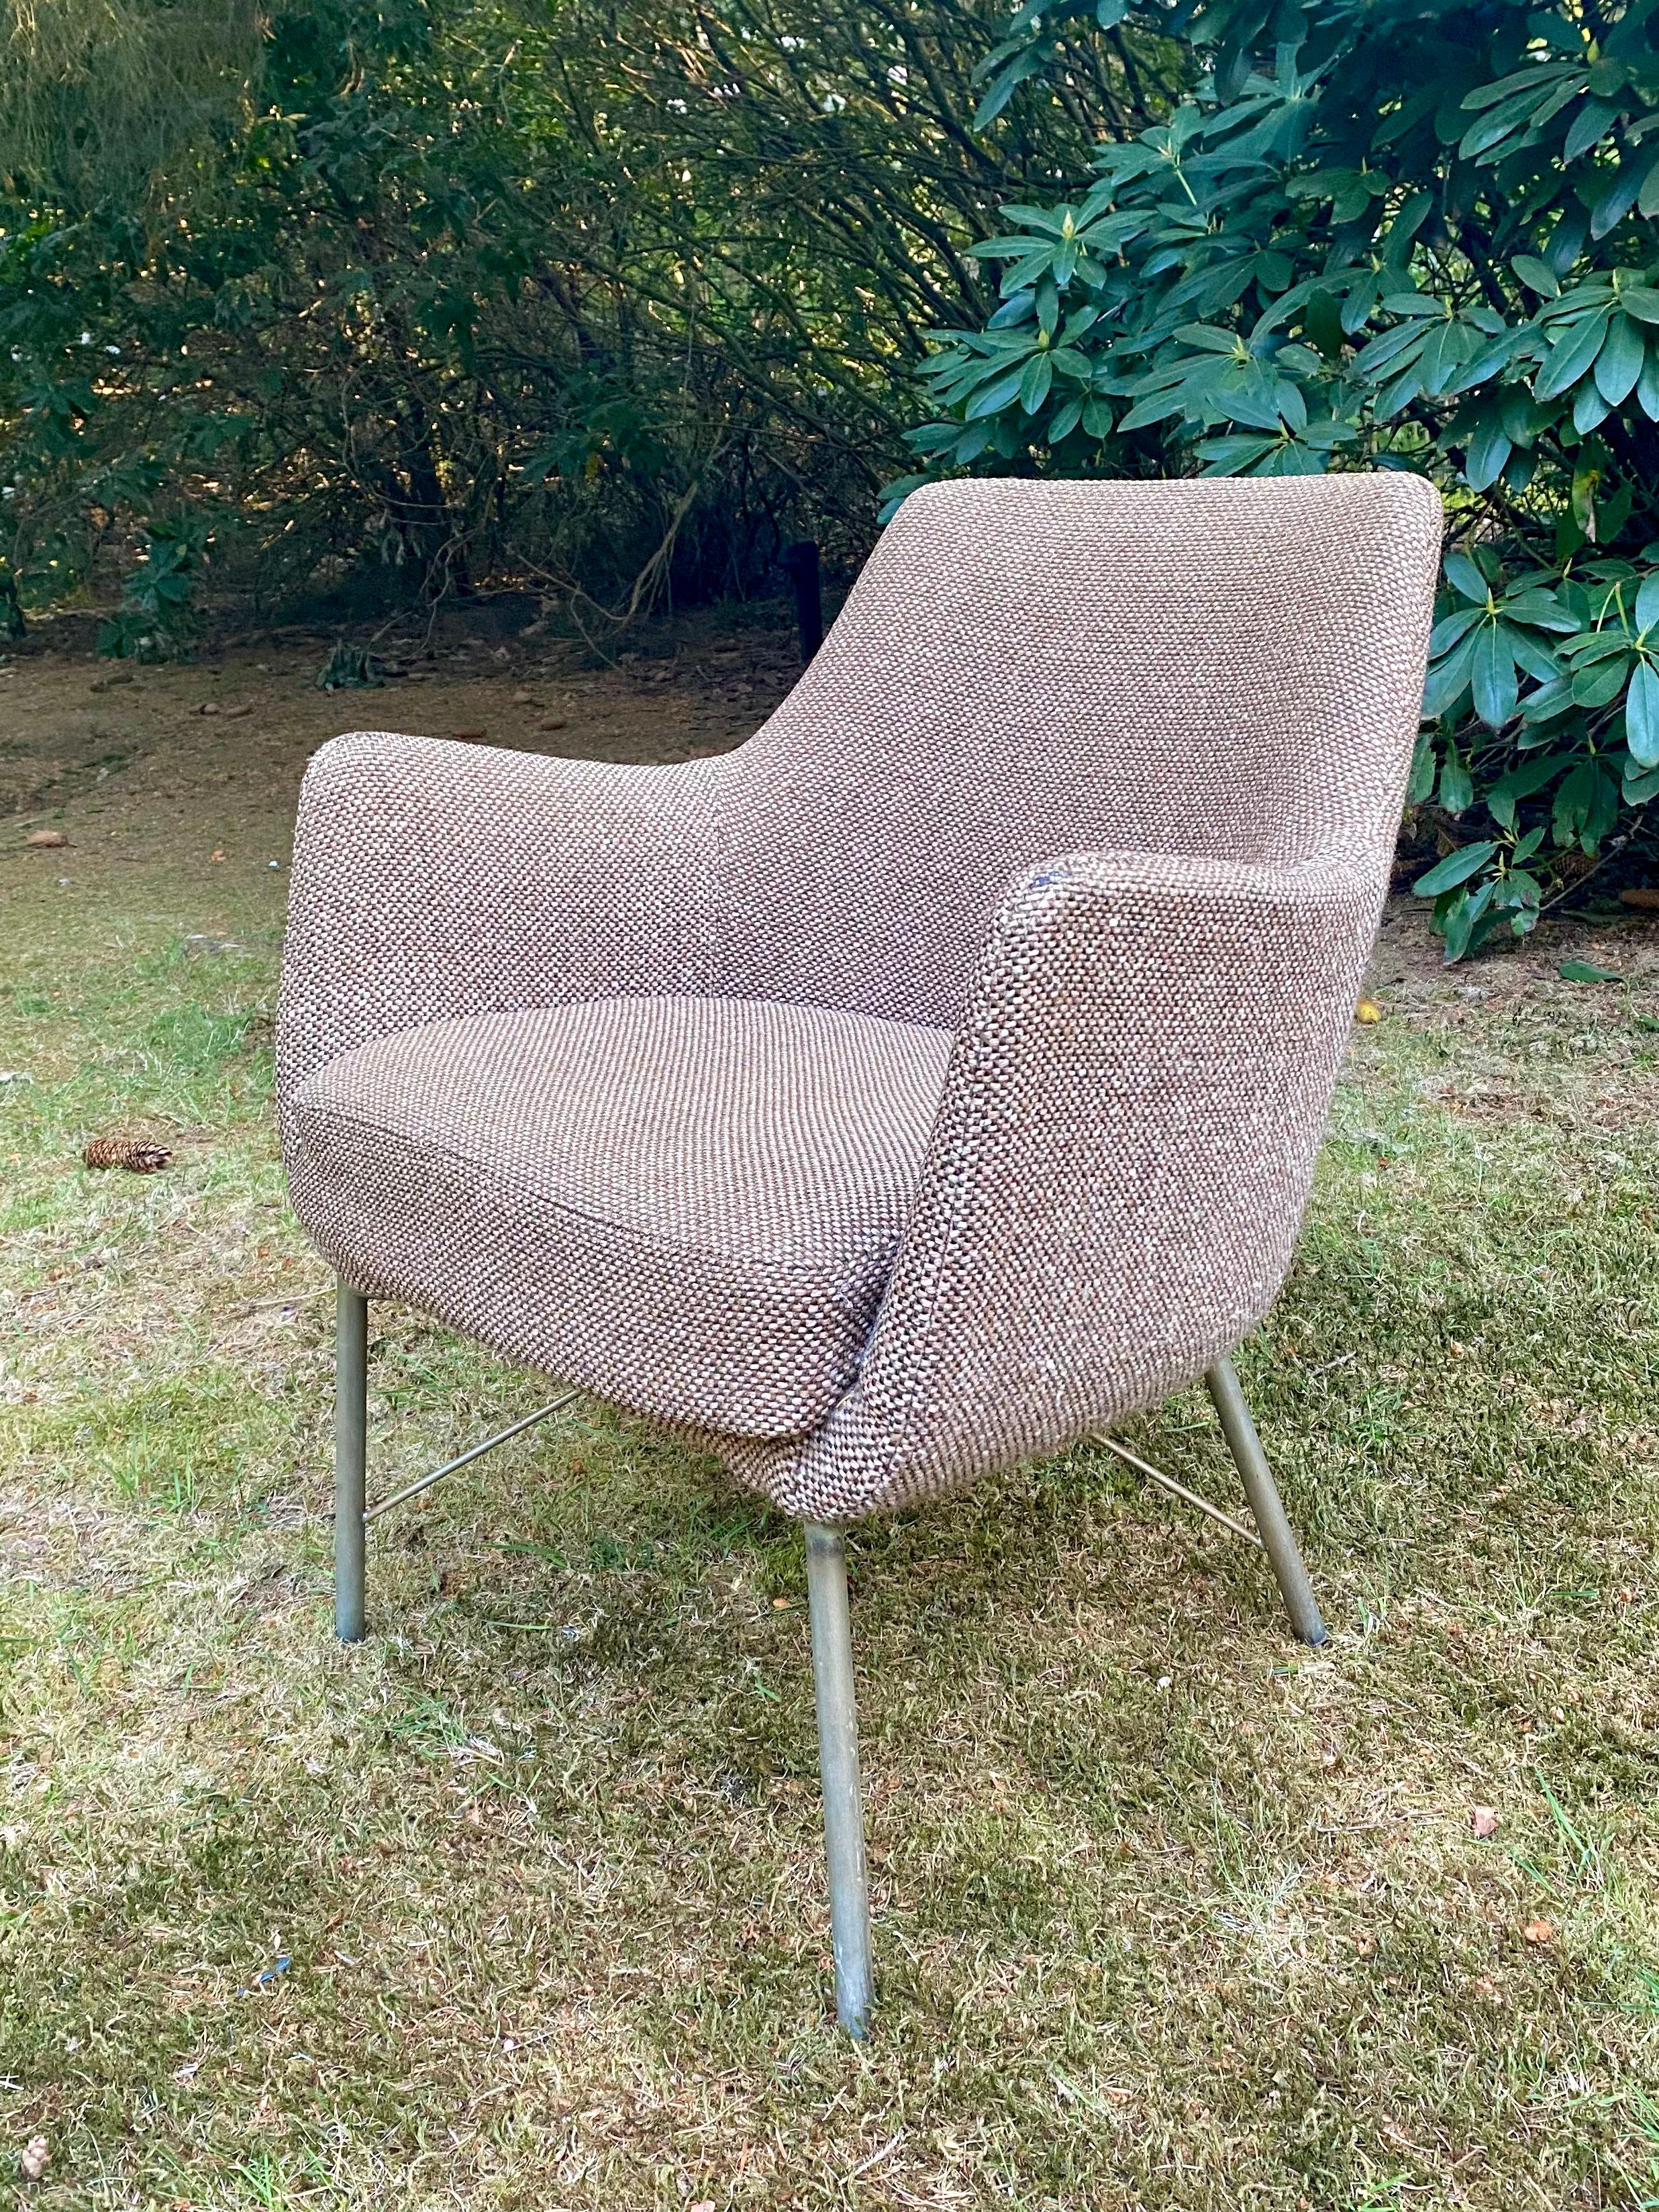 Mid-Century Modern ounge chair, easy chair or armchair, Designed by Karl Erik Ekselius for Pastoe. The chair features the original mixed Brown woolen upholstery which shows some wear to the corners and the Original Chrome base. One leg welded, but